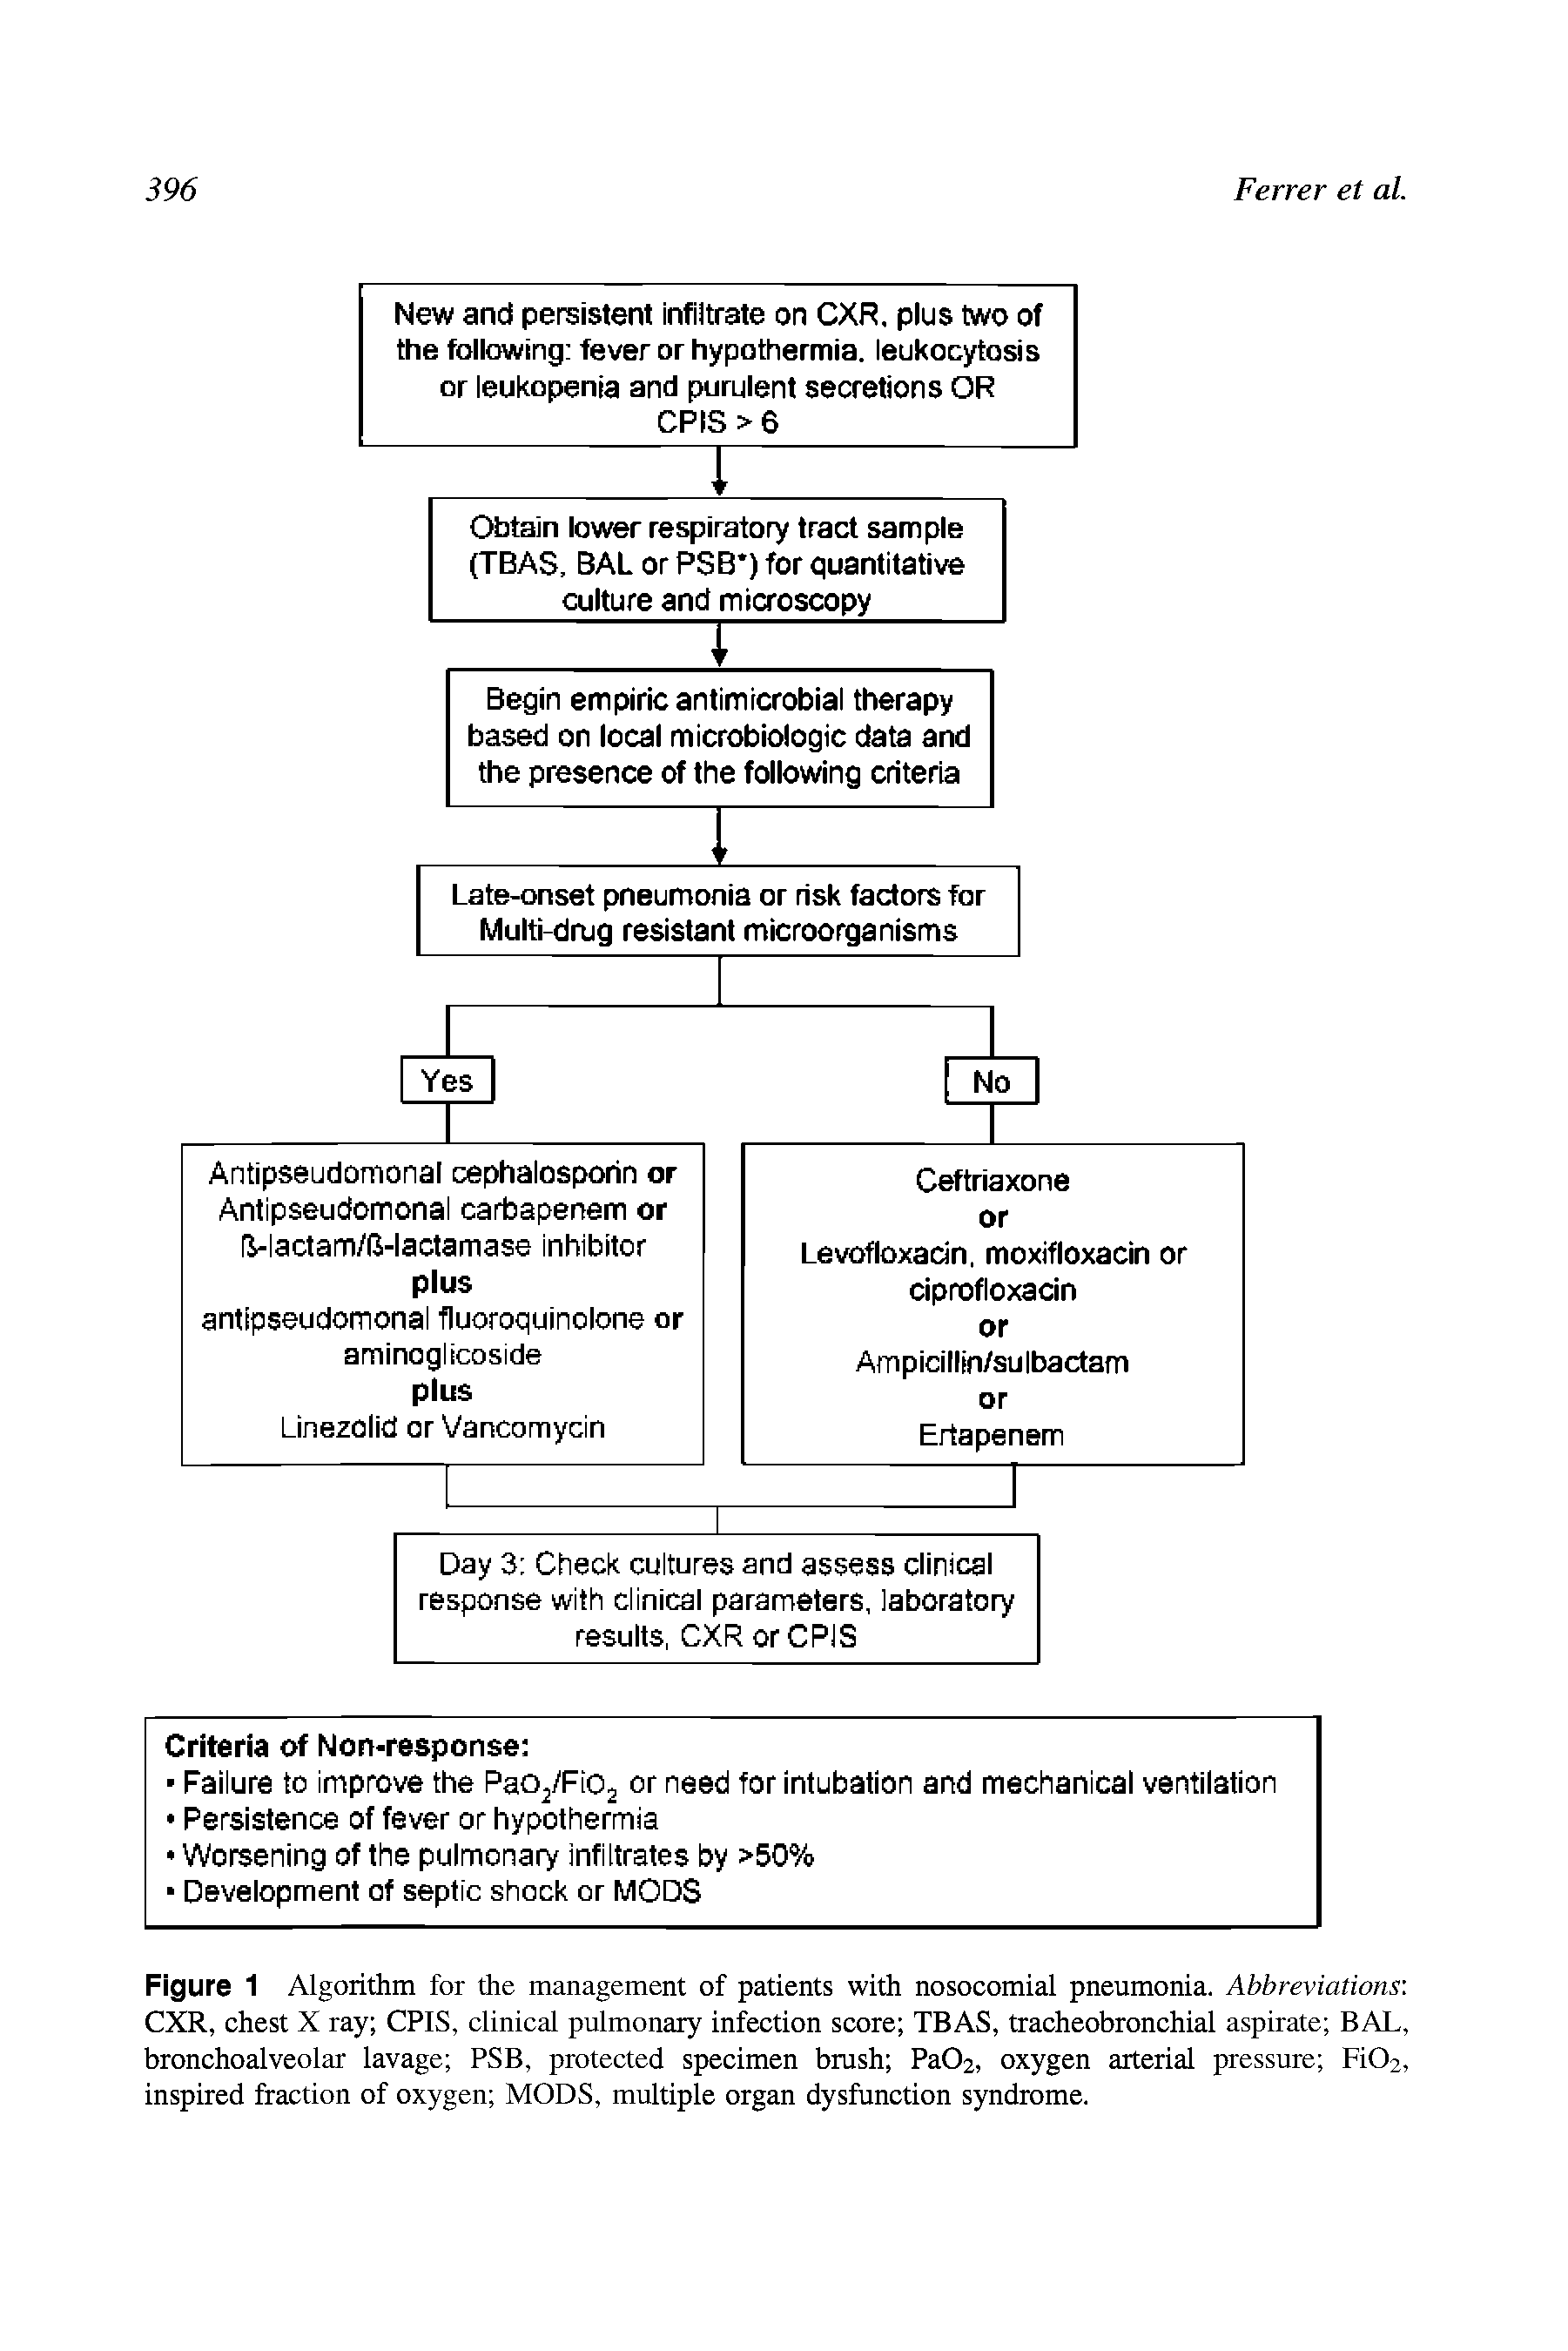 Figure 1 Algorithm for the management of patients with nosocomial pneumonia. Abbreviations CXR, chest X ray CPIS, clinical pulmonary infection score TEAS, tracheobronchial aspirate BAL, bronchoalveolar lavage PSB, protected specimen bmsh PaOa, oxygen arterial pressure Fi02, inspired fraction of oxygen MODS, multiple organ dysfunction syndrome.